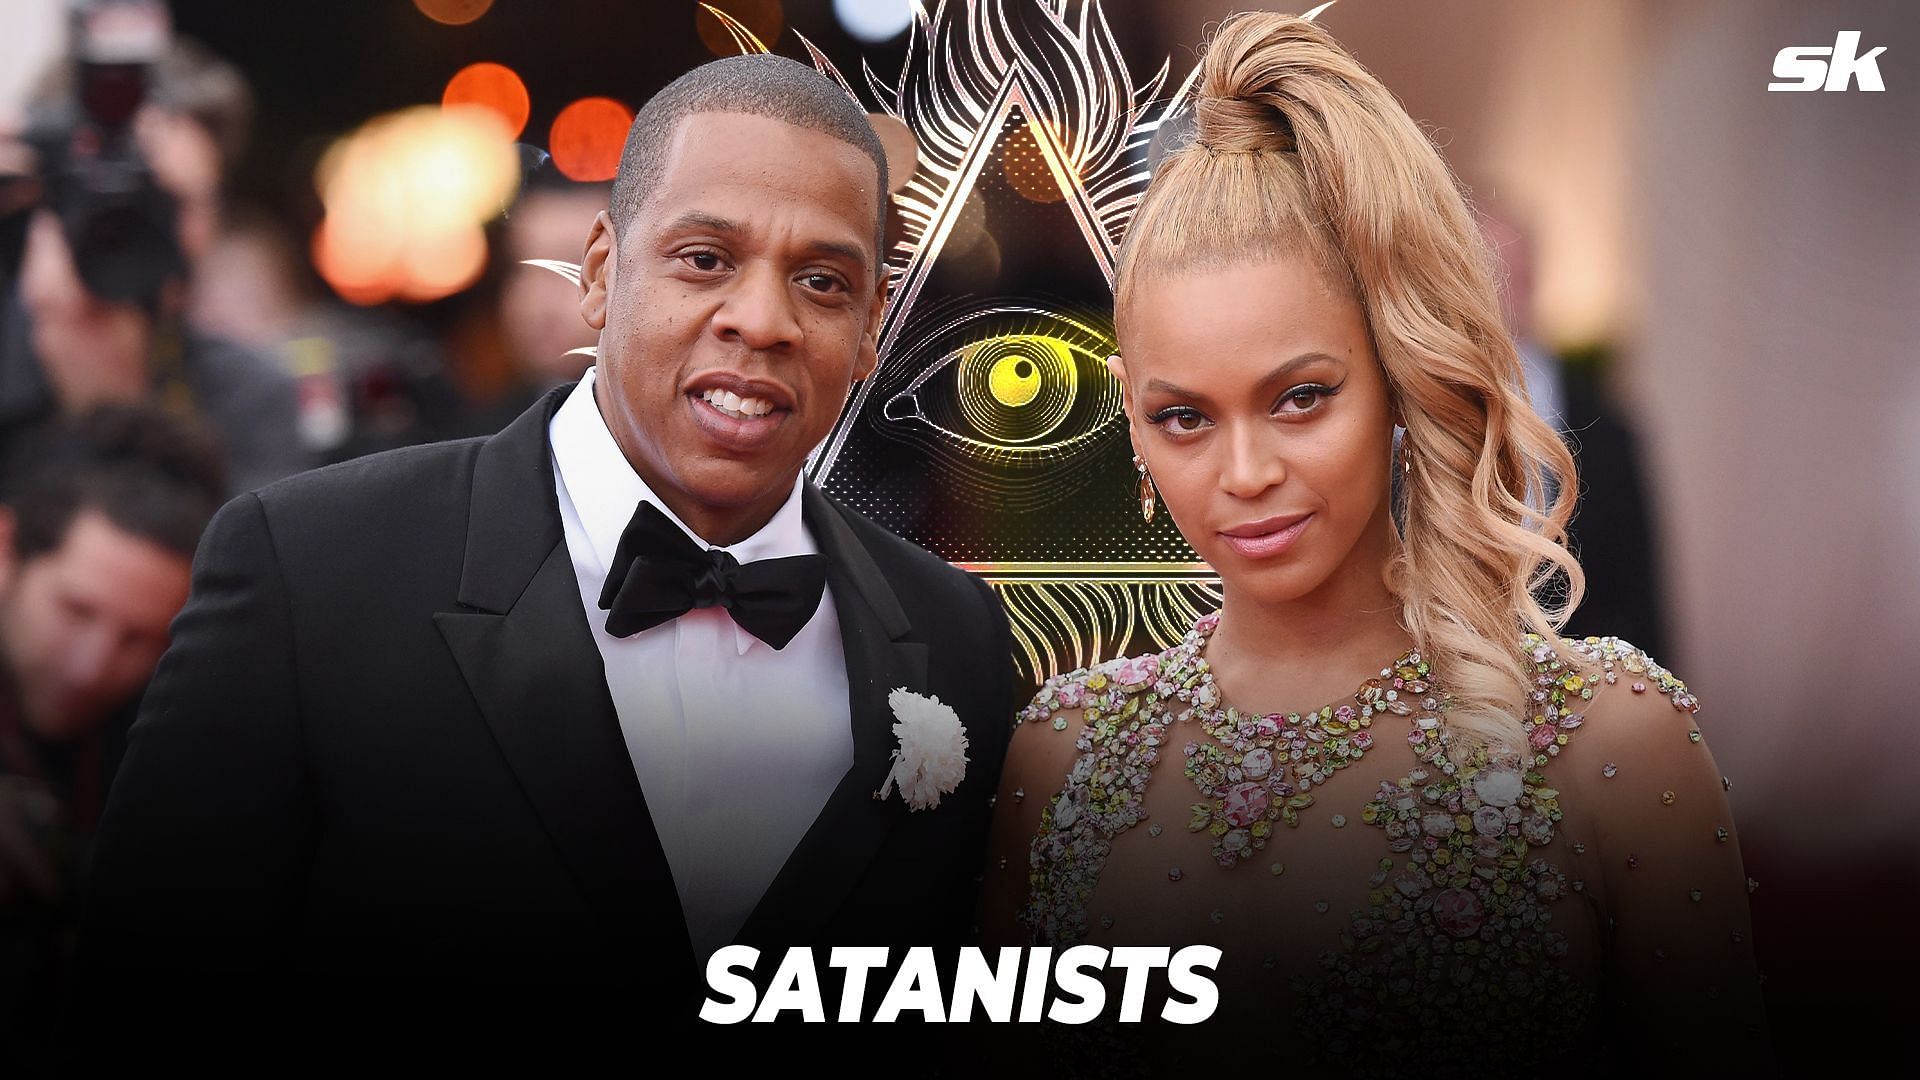 Ex-Chiefs RB claims Jay Z and Beyonce work for the Illuminati